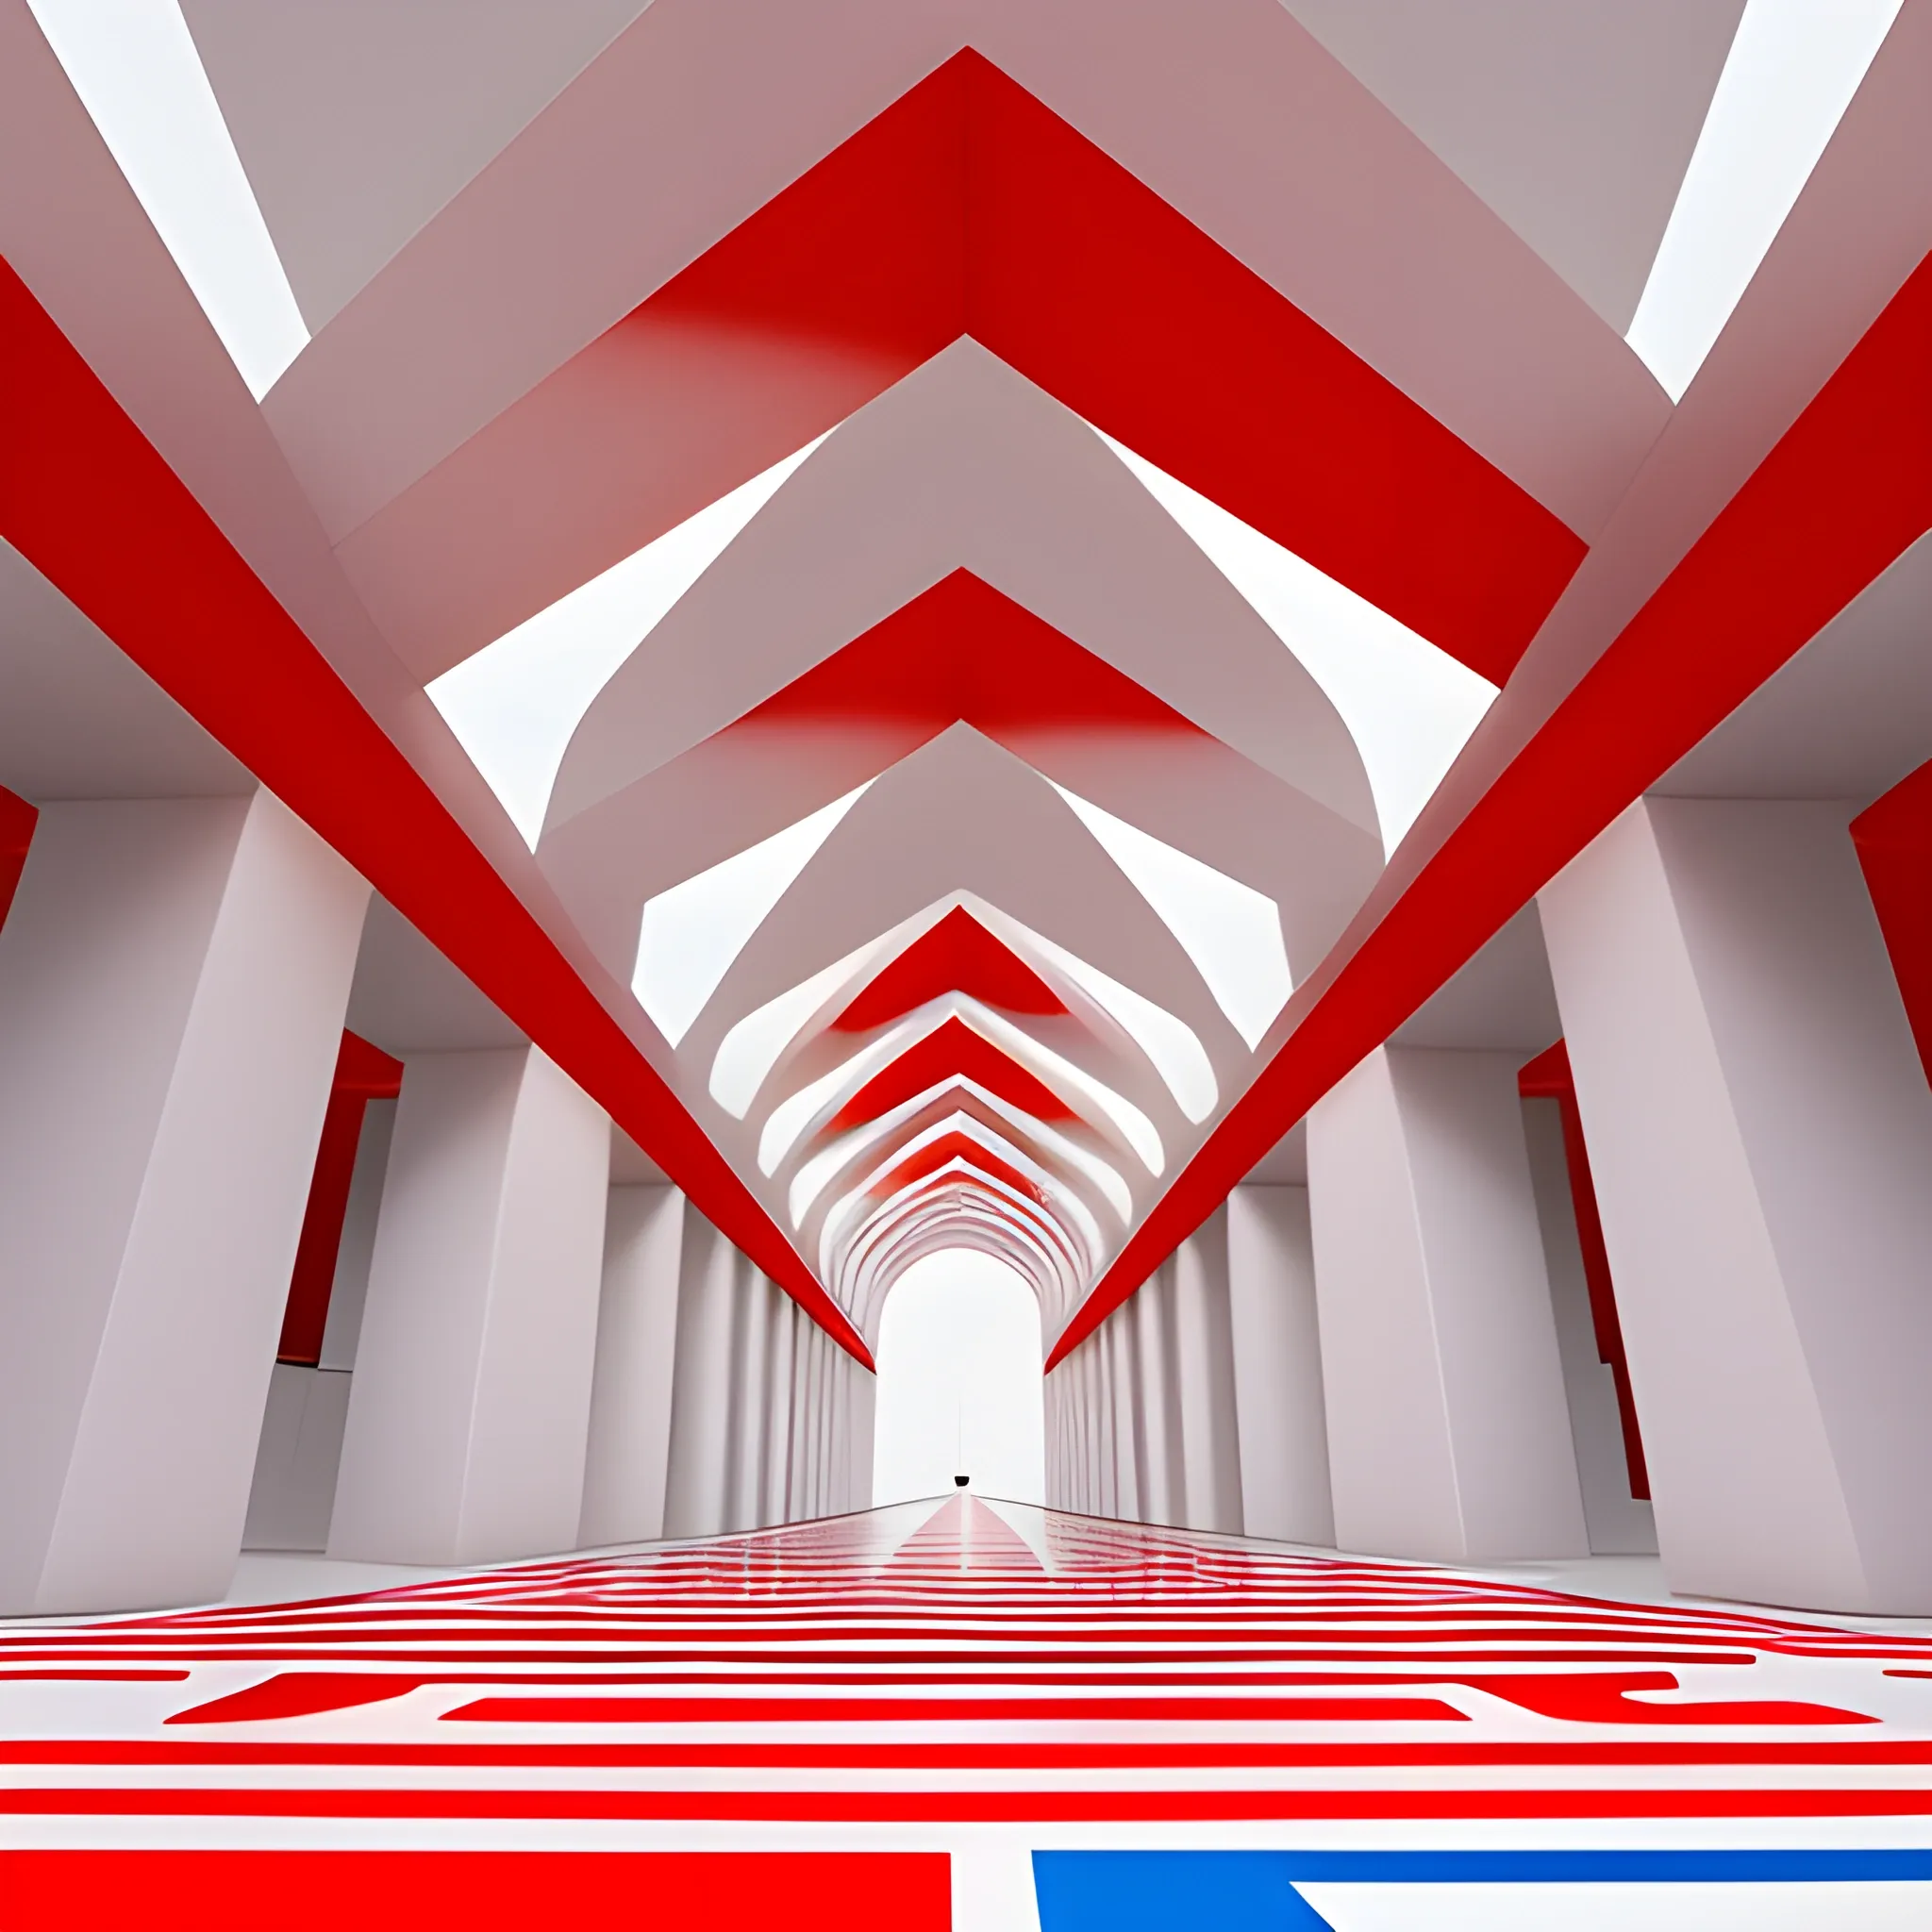 Labyrinth of white marble walls surrounded by abstract geometric shapes of different colors and gradients, the right path in the labyrinth is red, at the end of the path there is a red flag, the image is in perspective, high detail, 3D